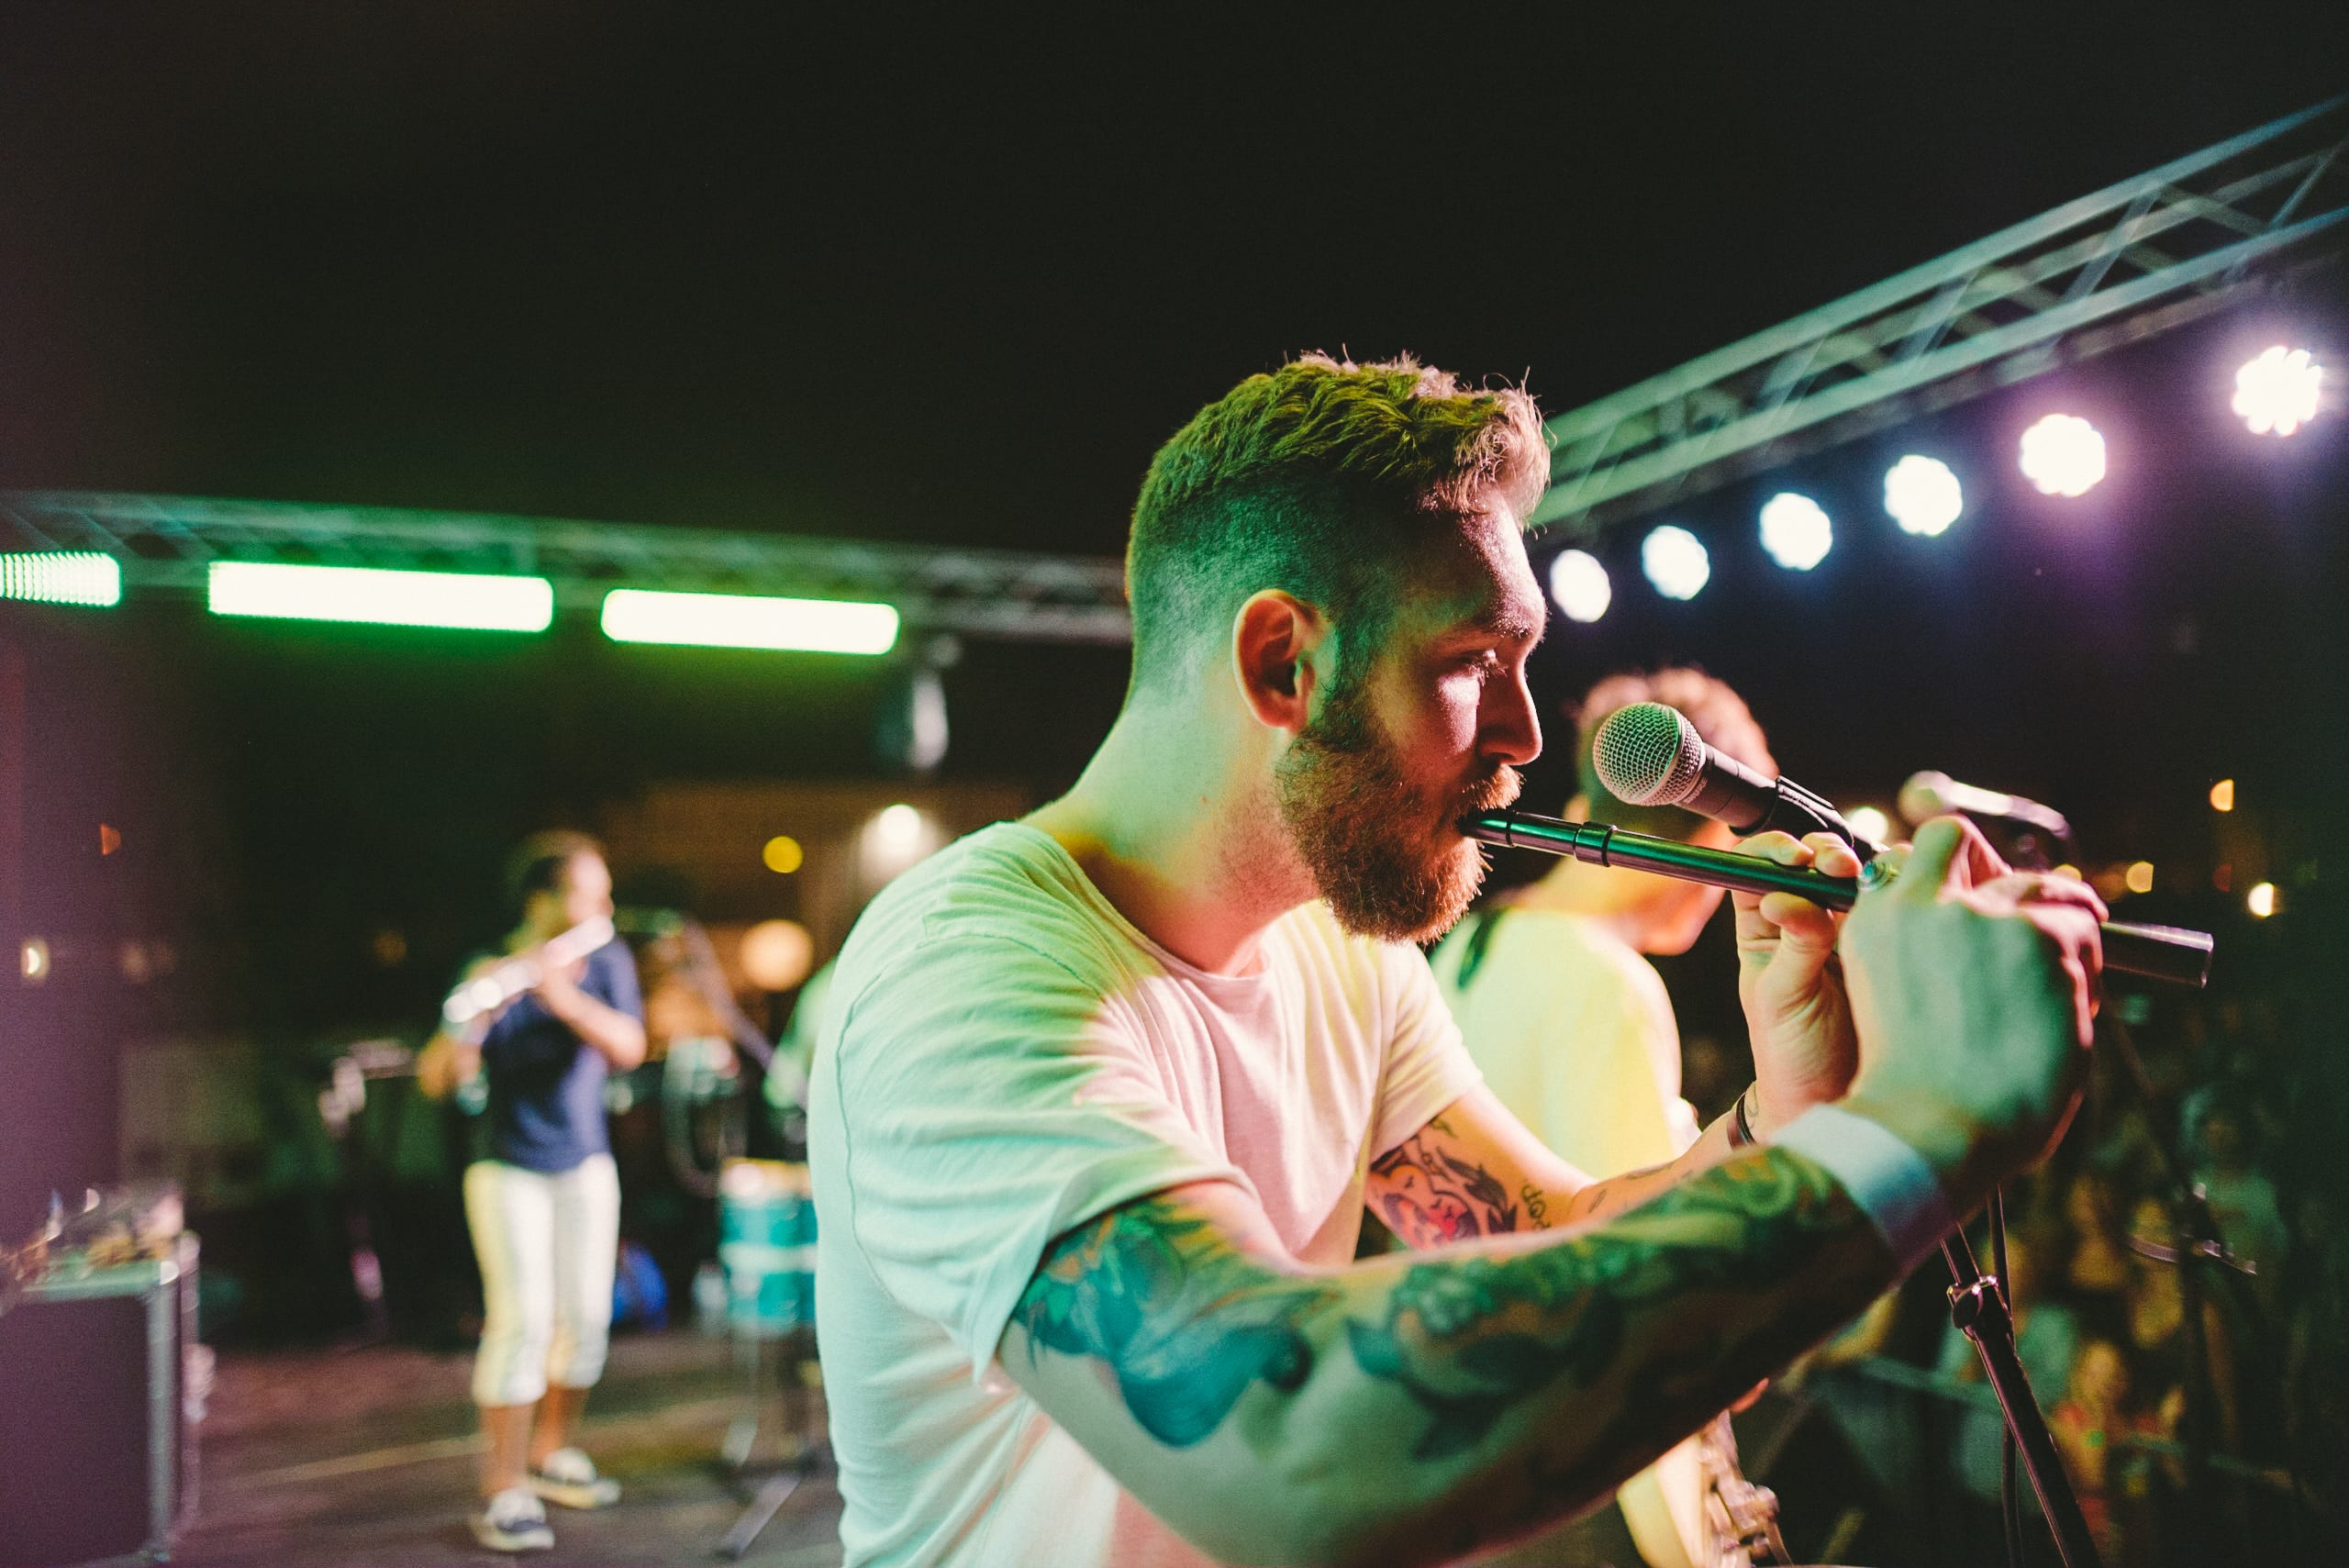 Tattooed short haired with beard flute player playing the flute in a band with another flute player in the background and a guitarist next to him